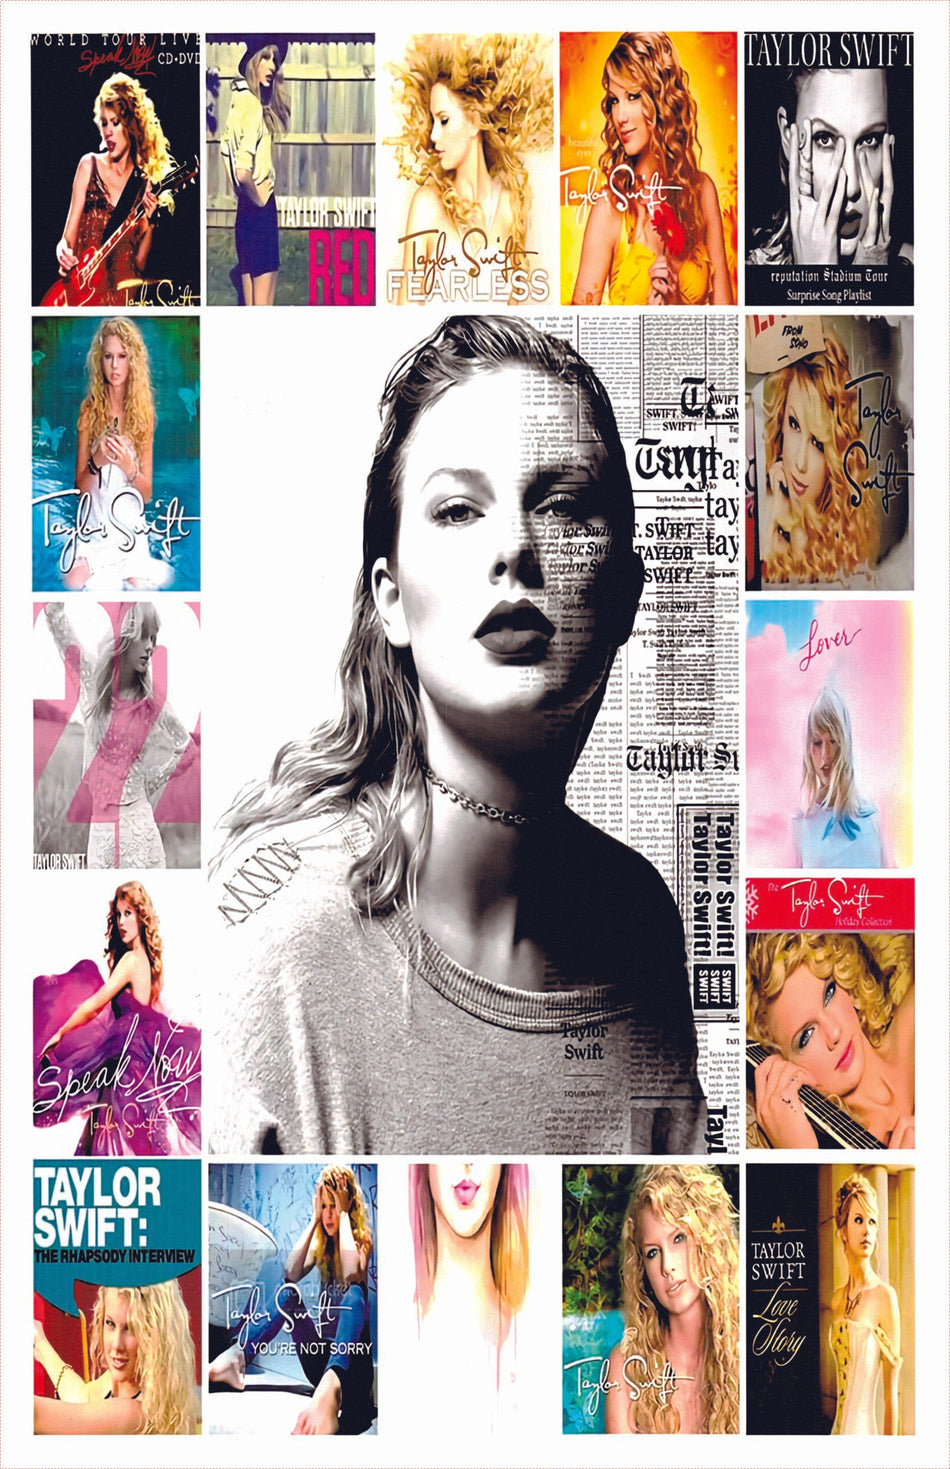 Taylor Swift Collage 1 Poster